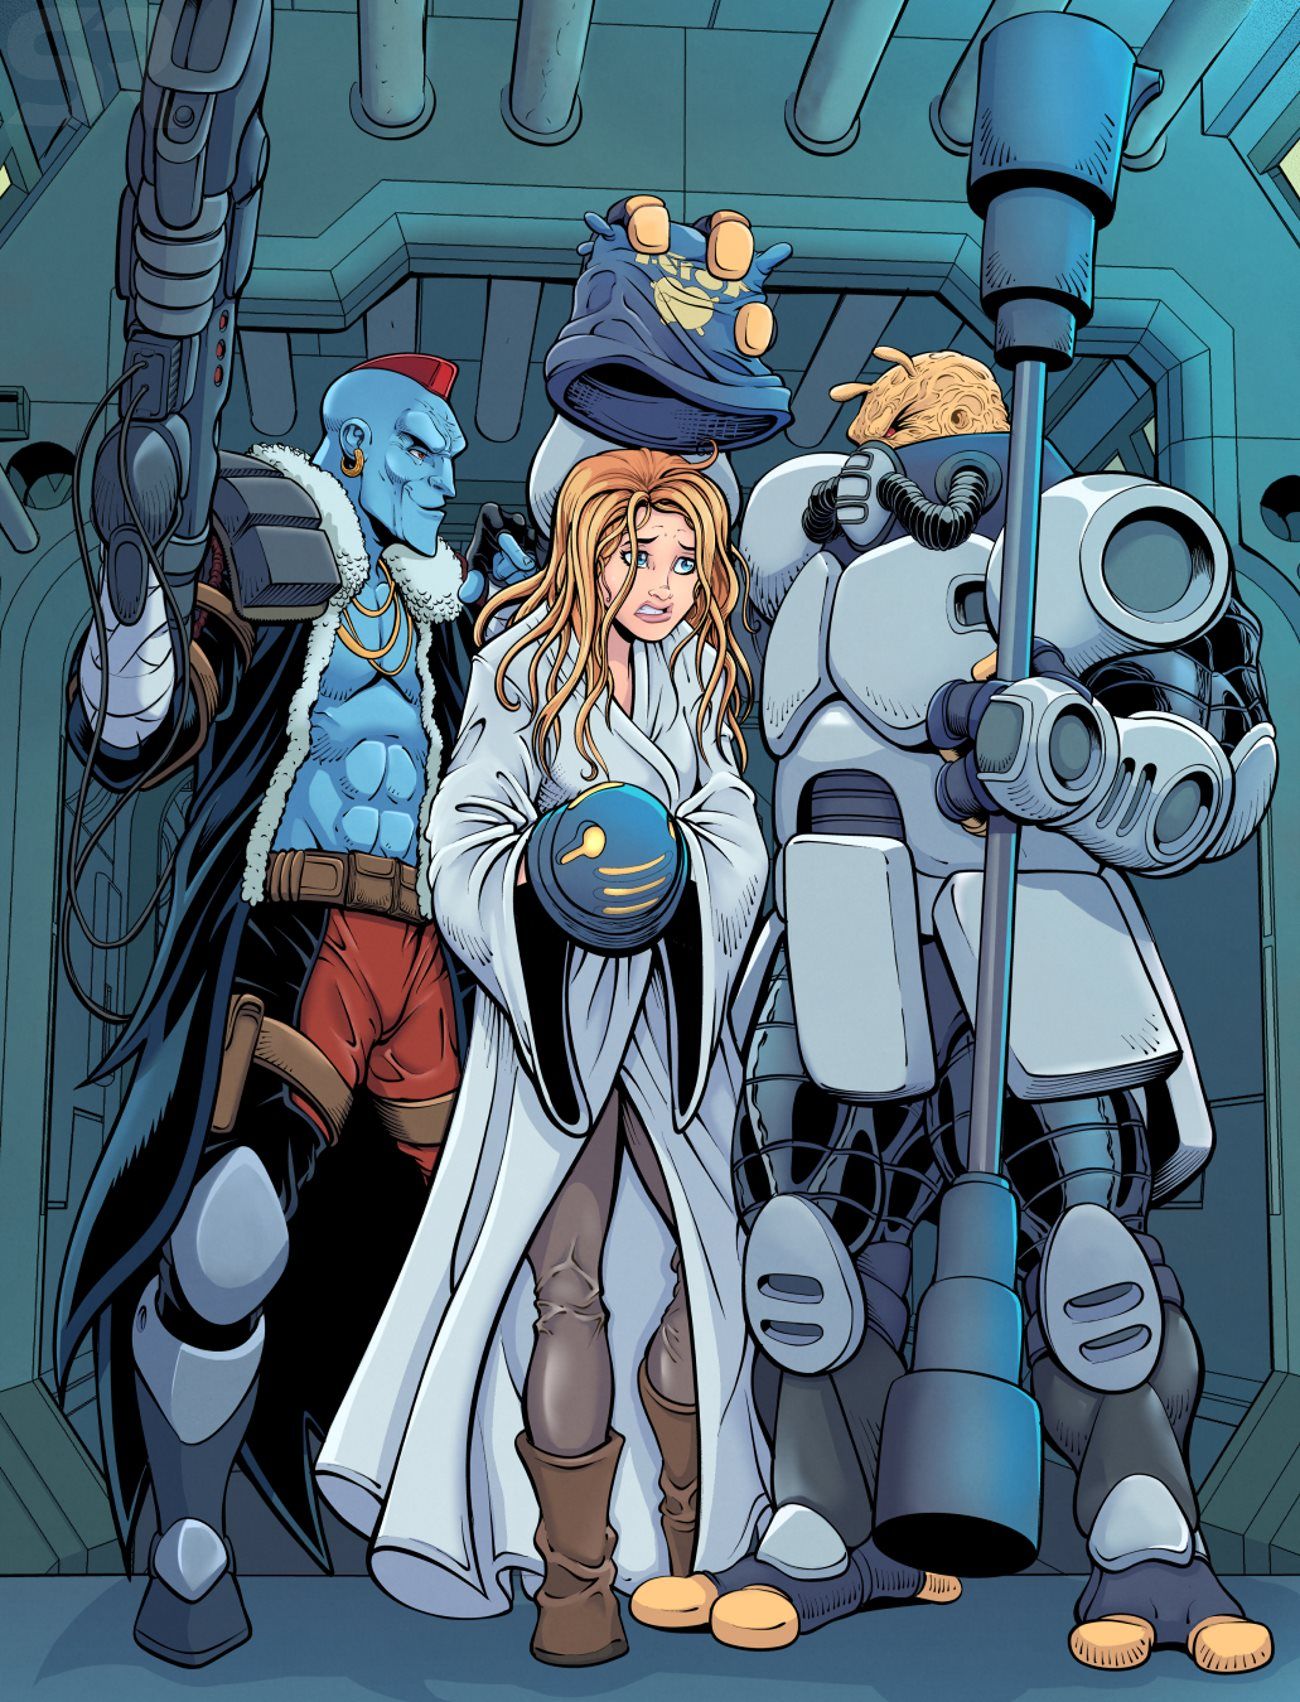 Exclusive Marvels FUTURE FOUNDATION Team Previews New Series